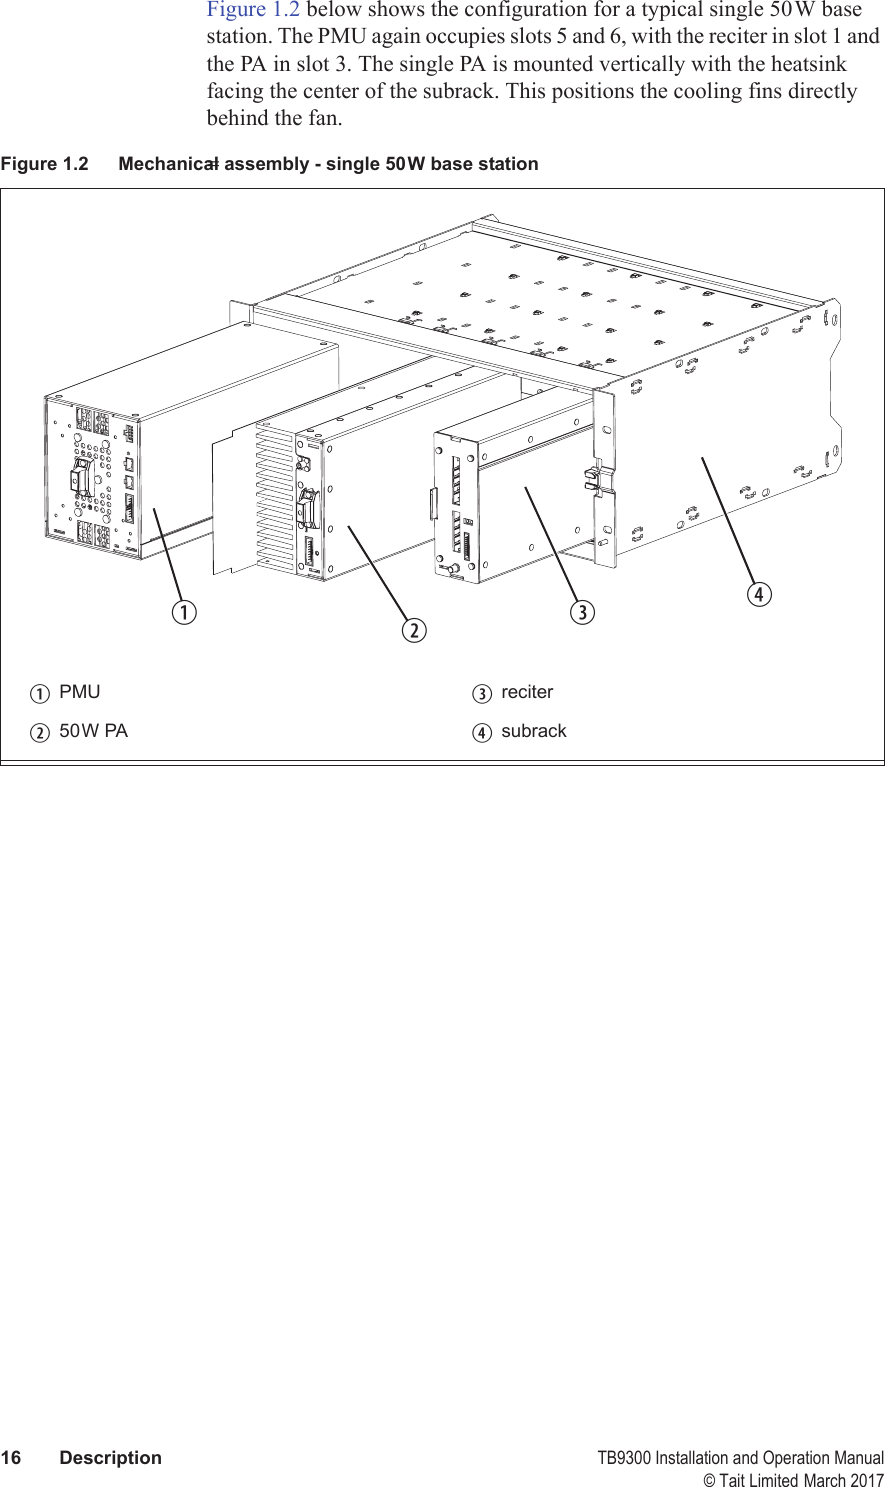  16 Description TB9300 Installation and Operation Manual© Tait Limited March 2017Figure 1.2 below shows the configuration for a typical single 50W base station. The PMU again occupies slots 5 and 6, with the reciter in slot 1 and the PA in slot 3. The single PA is mounted vertically with the heatsink facing the center of the subrack. This positions the cooling fins directly behind the fan.=Figure 1.2 Mechanical assembly - single 50W base stationbPMU dreciterc50W PA esubrackbcde